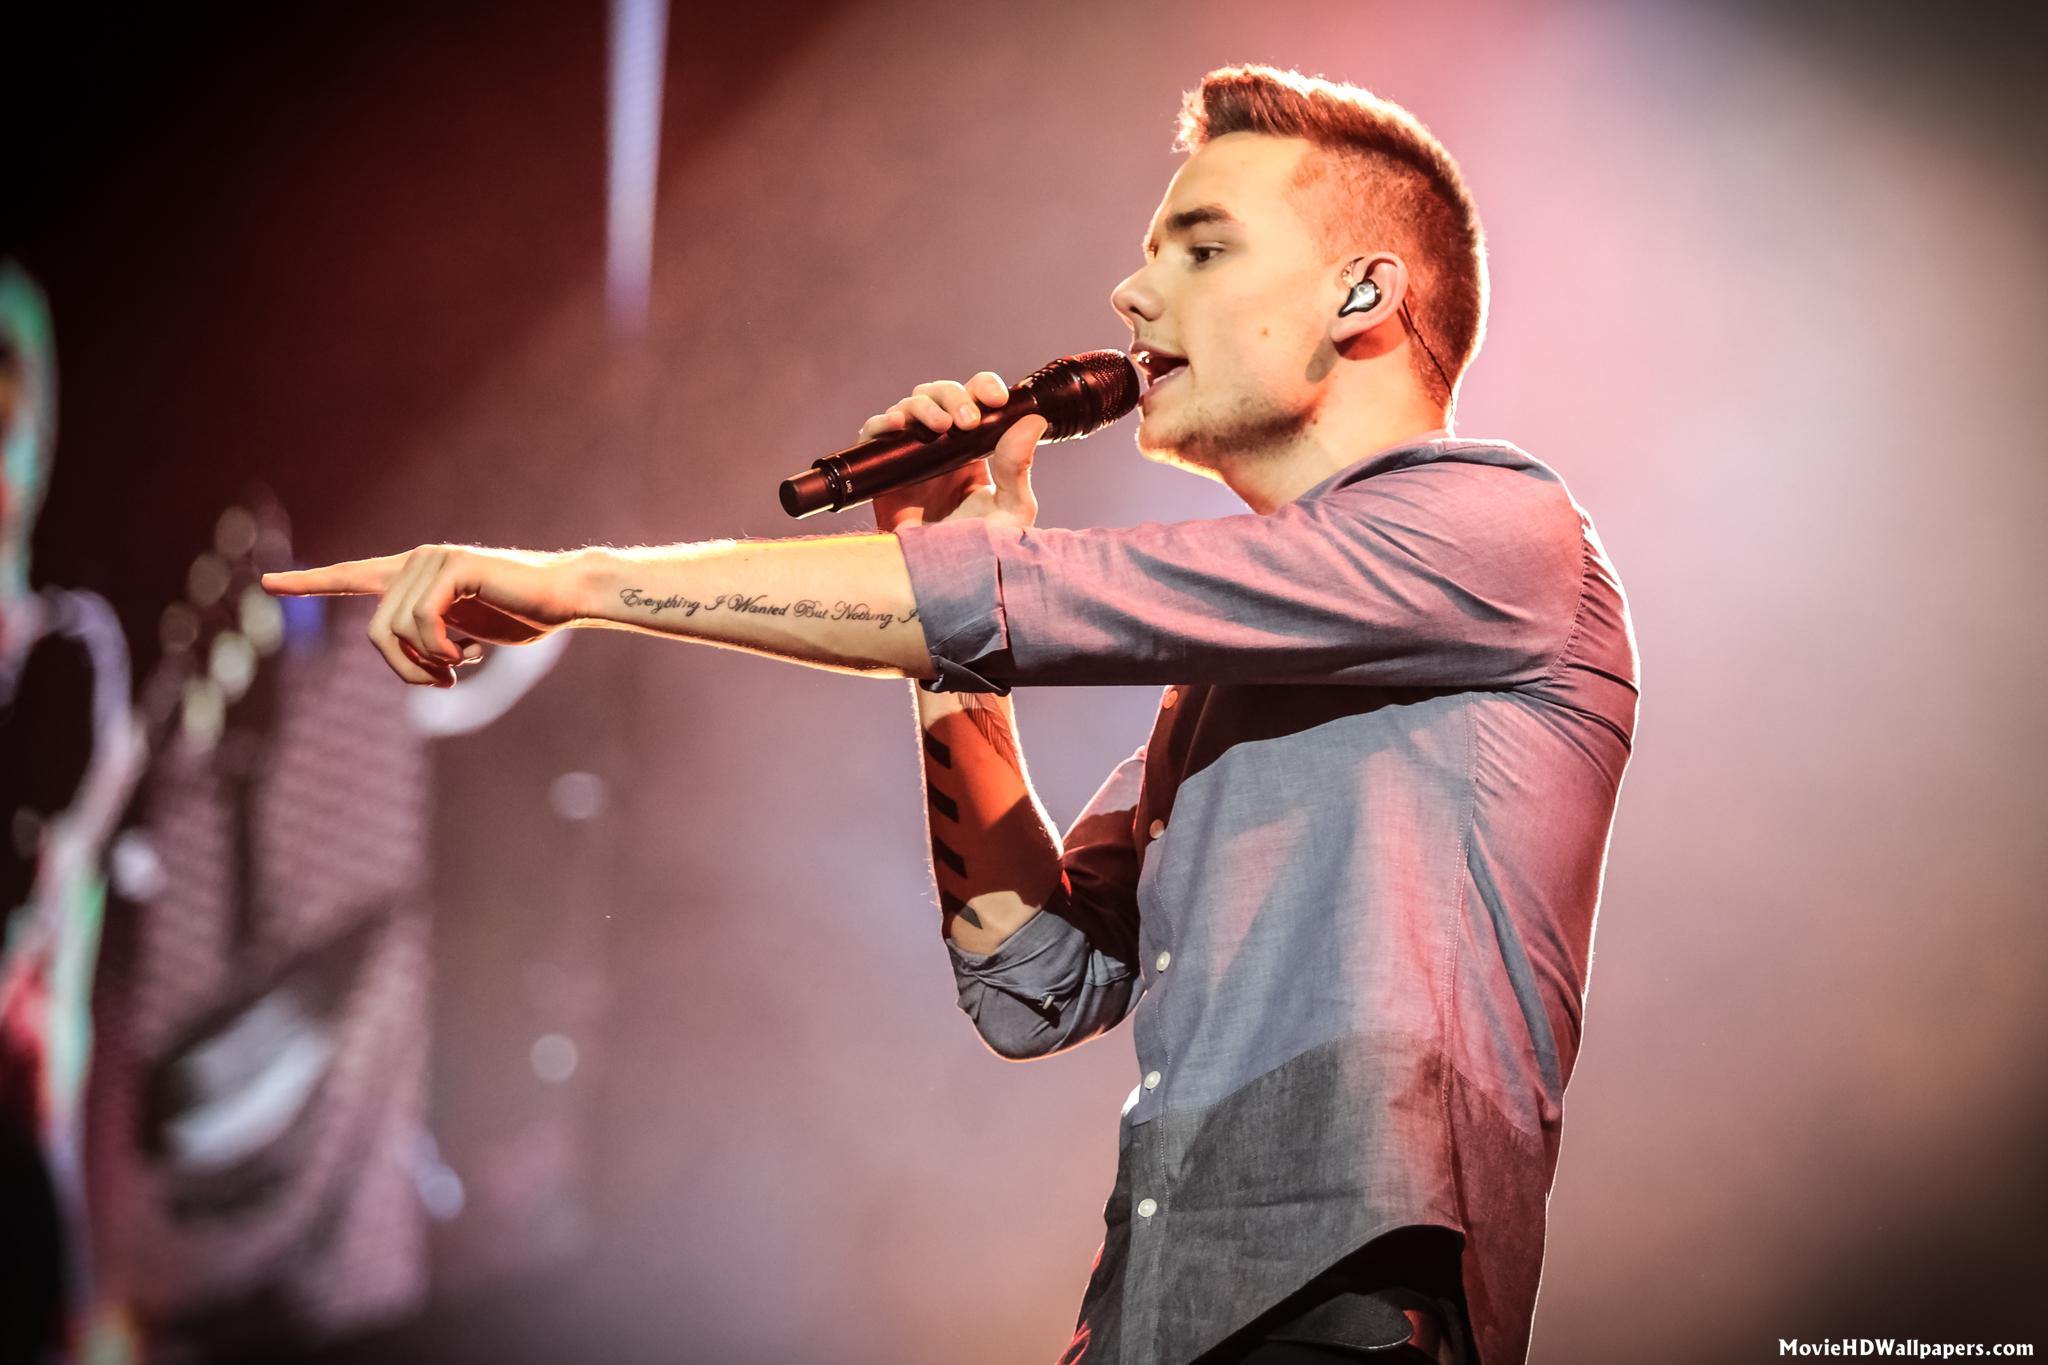 Liam Payne in One Direction This Is Us. Movie HD Wallpaper